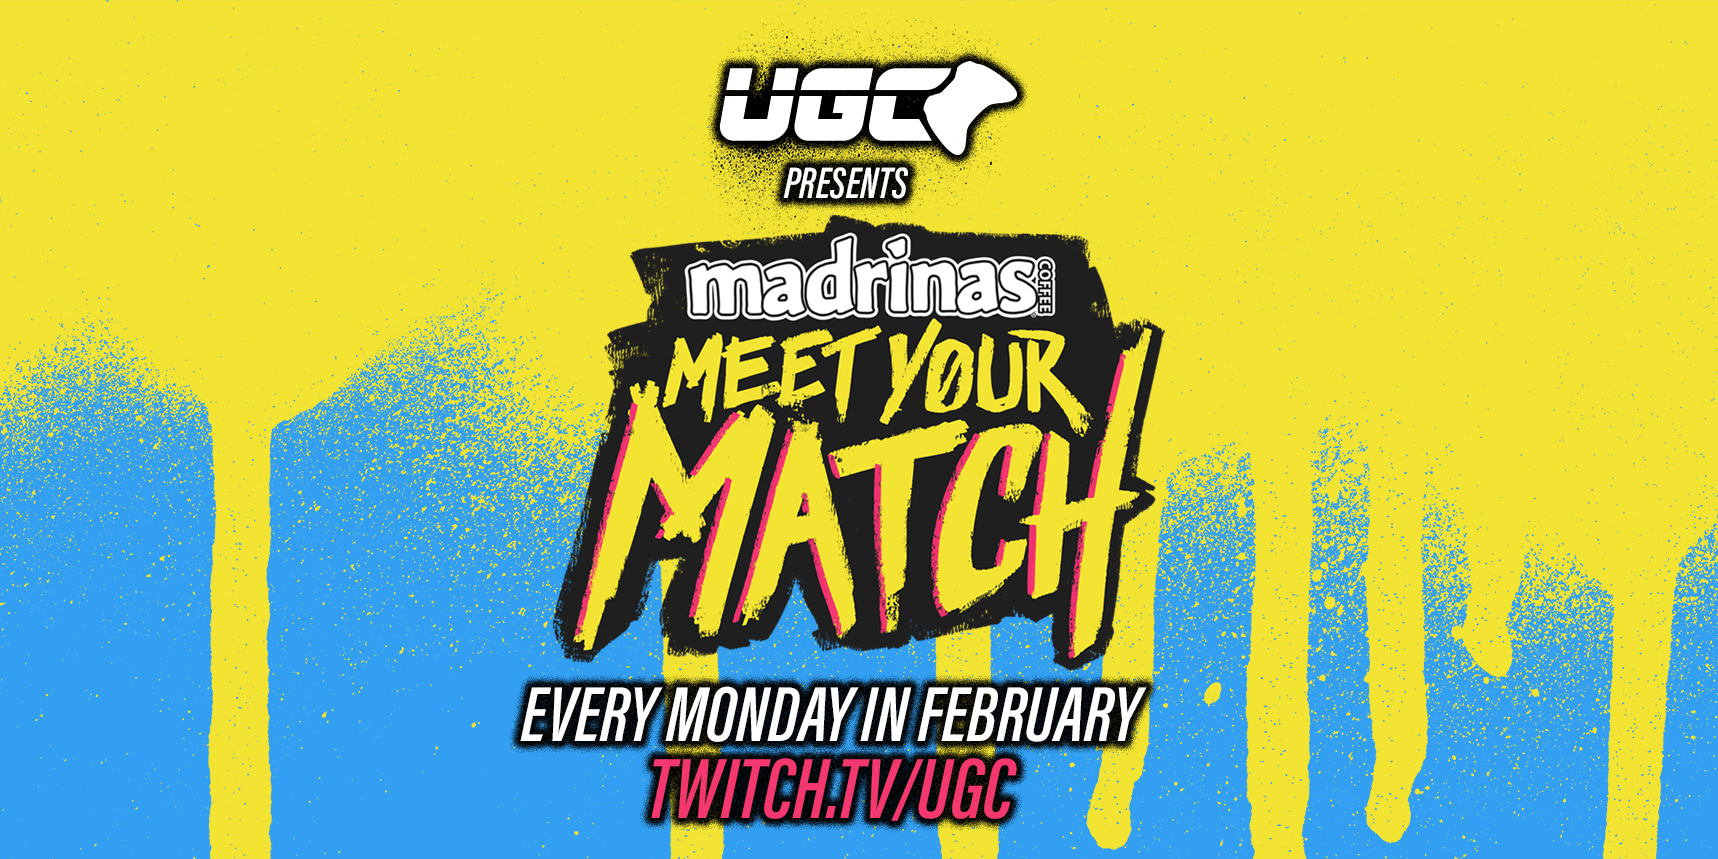 UGC partners with Madrinas Coffee to launch Meet Your Match! series